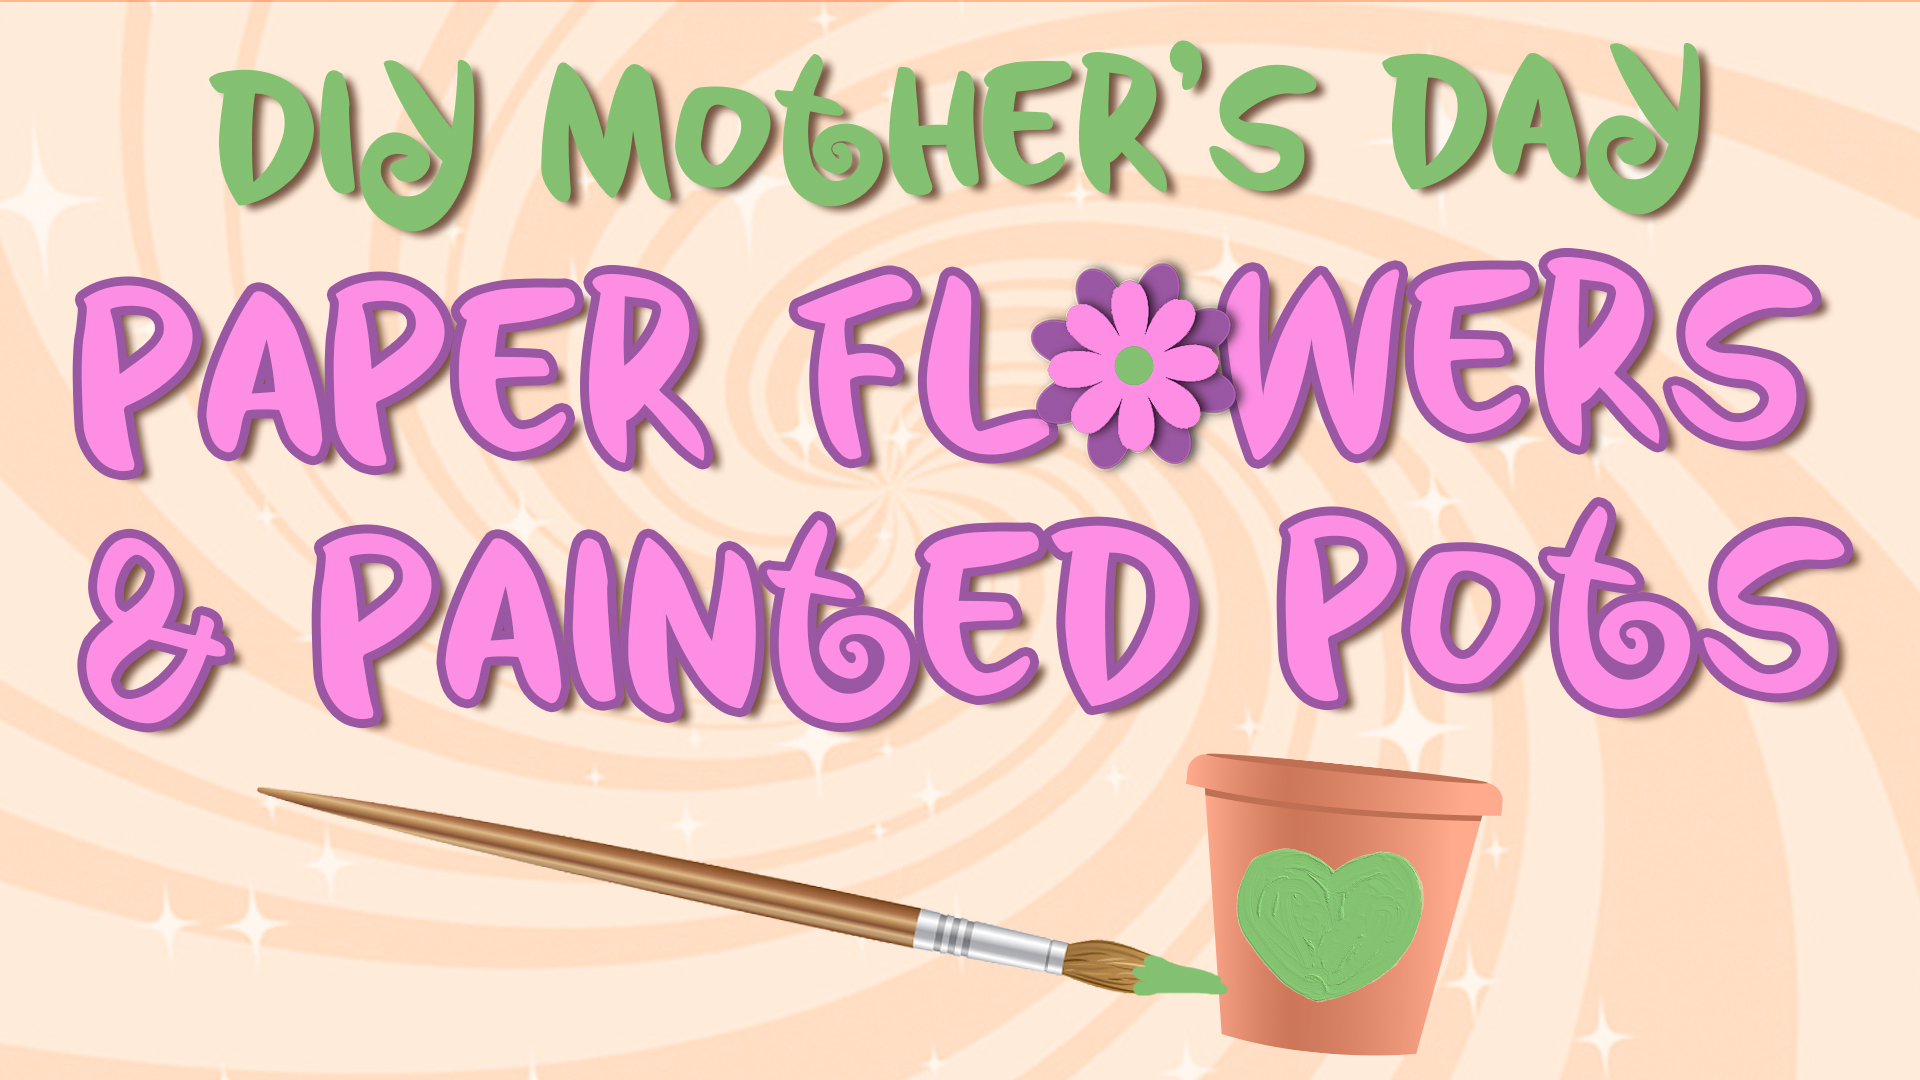 Image reads "DIY Mother's Day Paper Flowers & Painted Pots" against a swirled background. A paint brush and a terracotta pot with a painted heart is under the title.